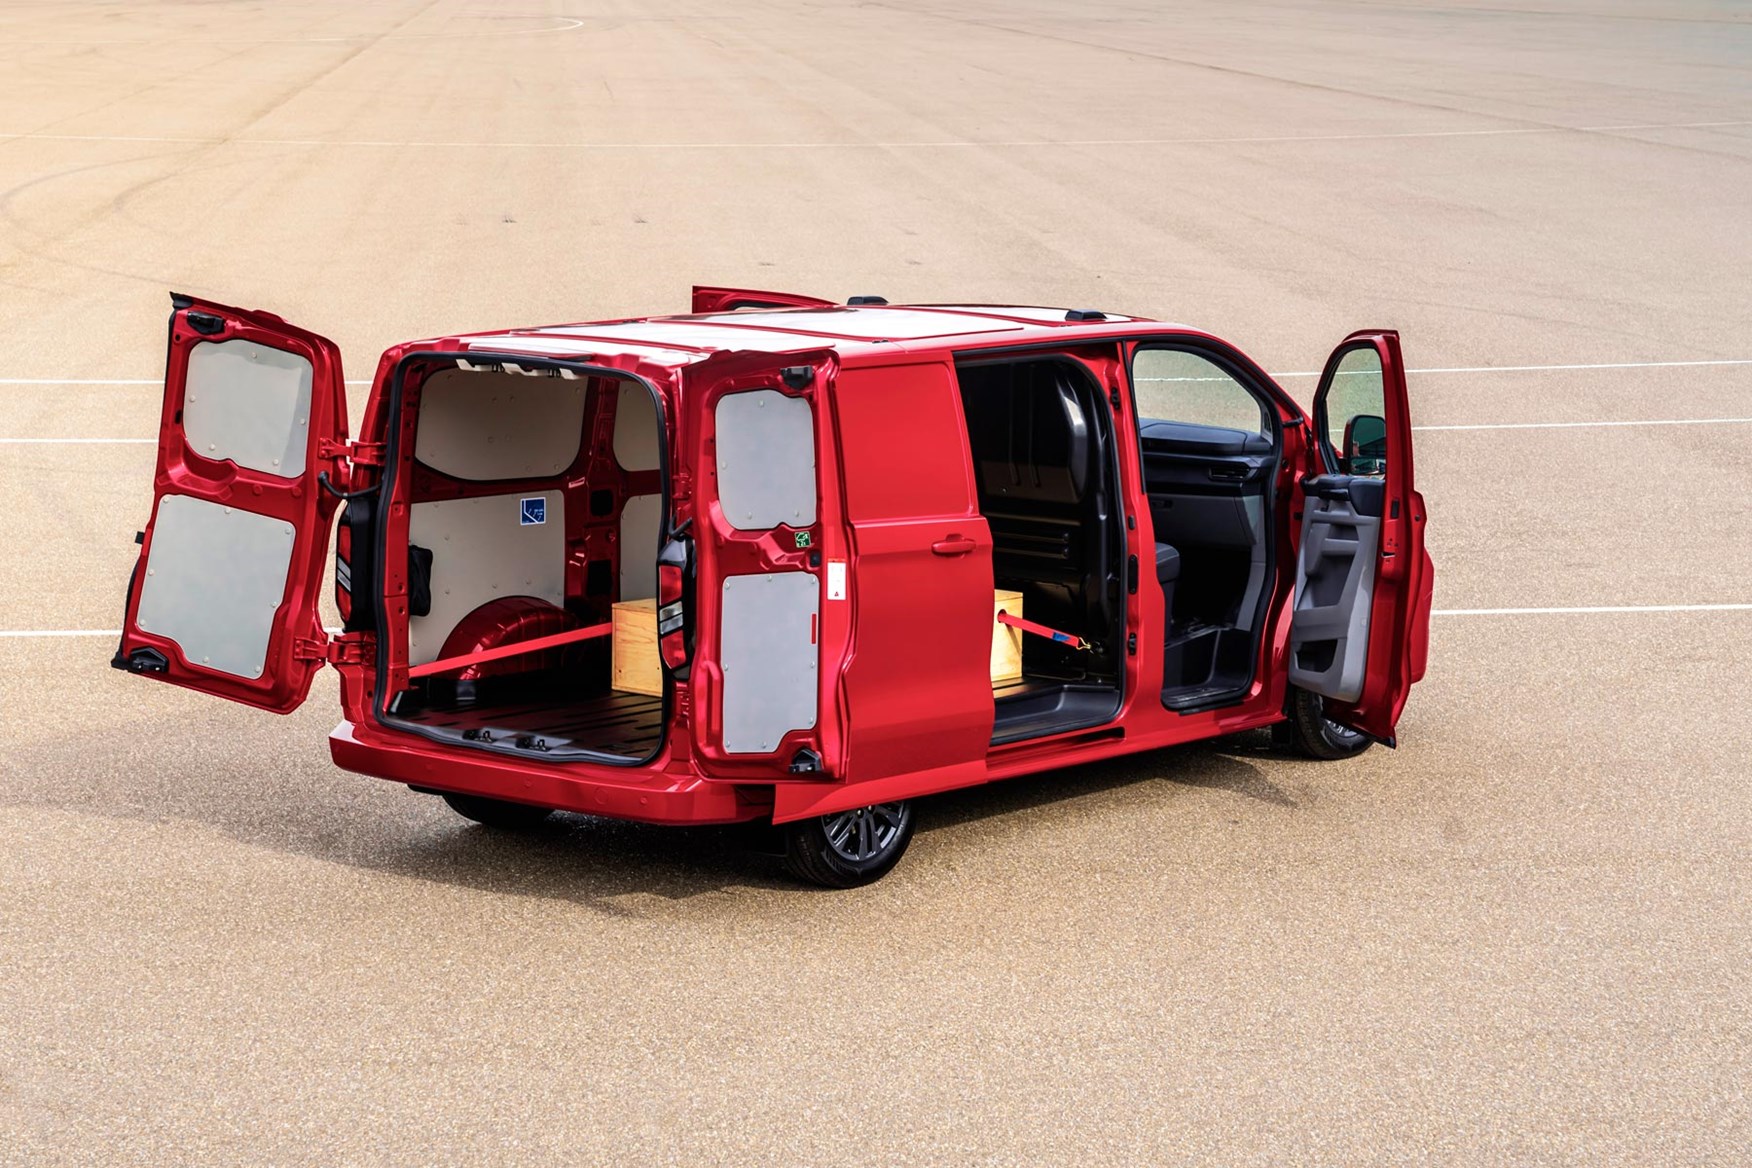 Ford has made the Transit Custom's rear loading bay easier to get in and out of.